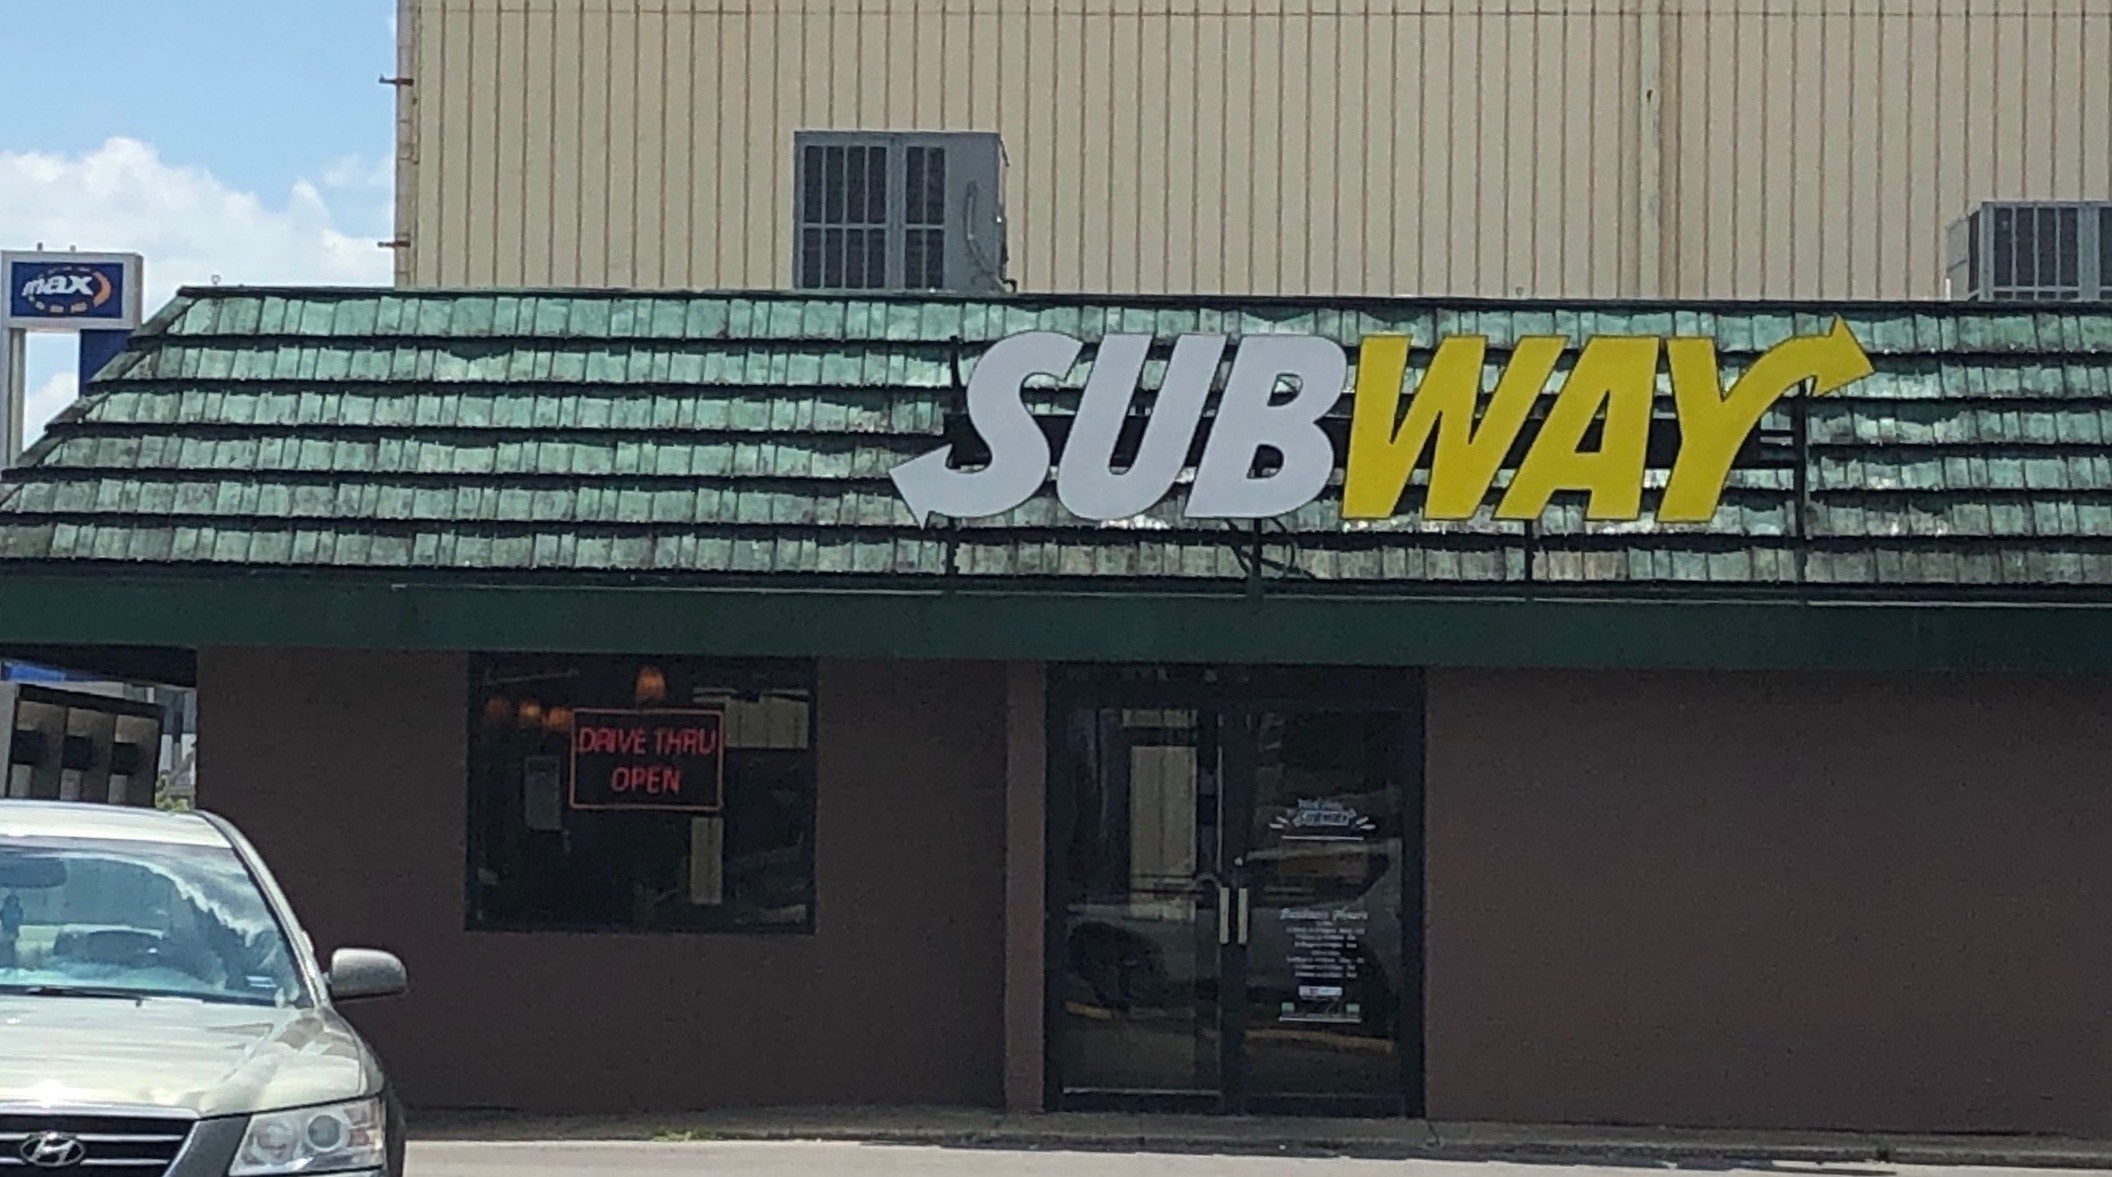 A car is parked in front of a Subway restaurant.